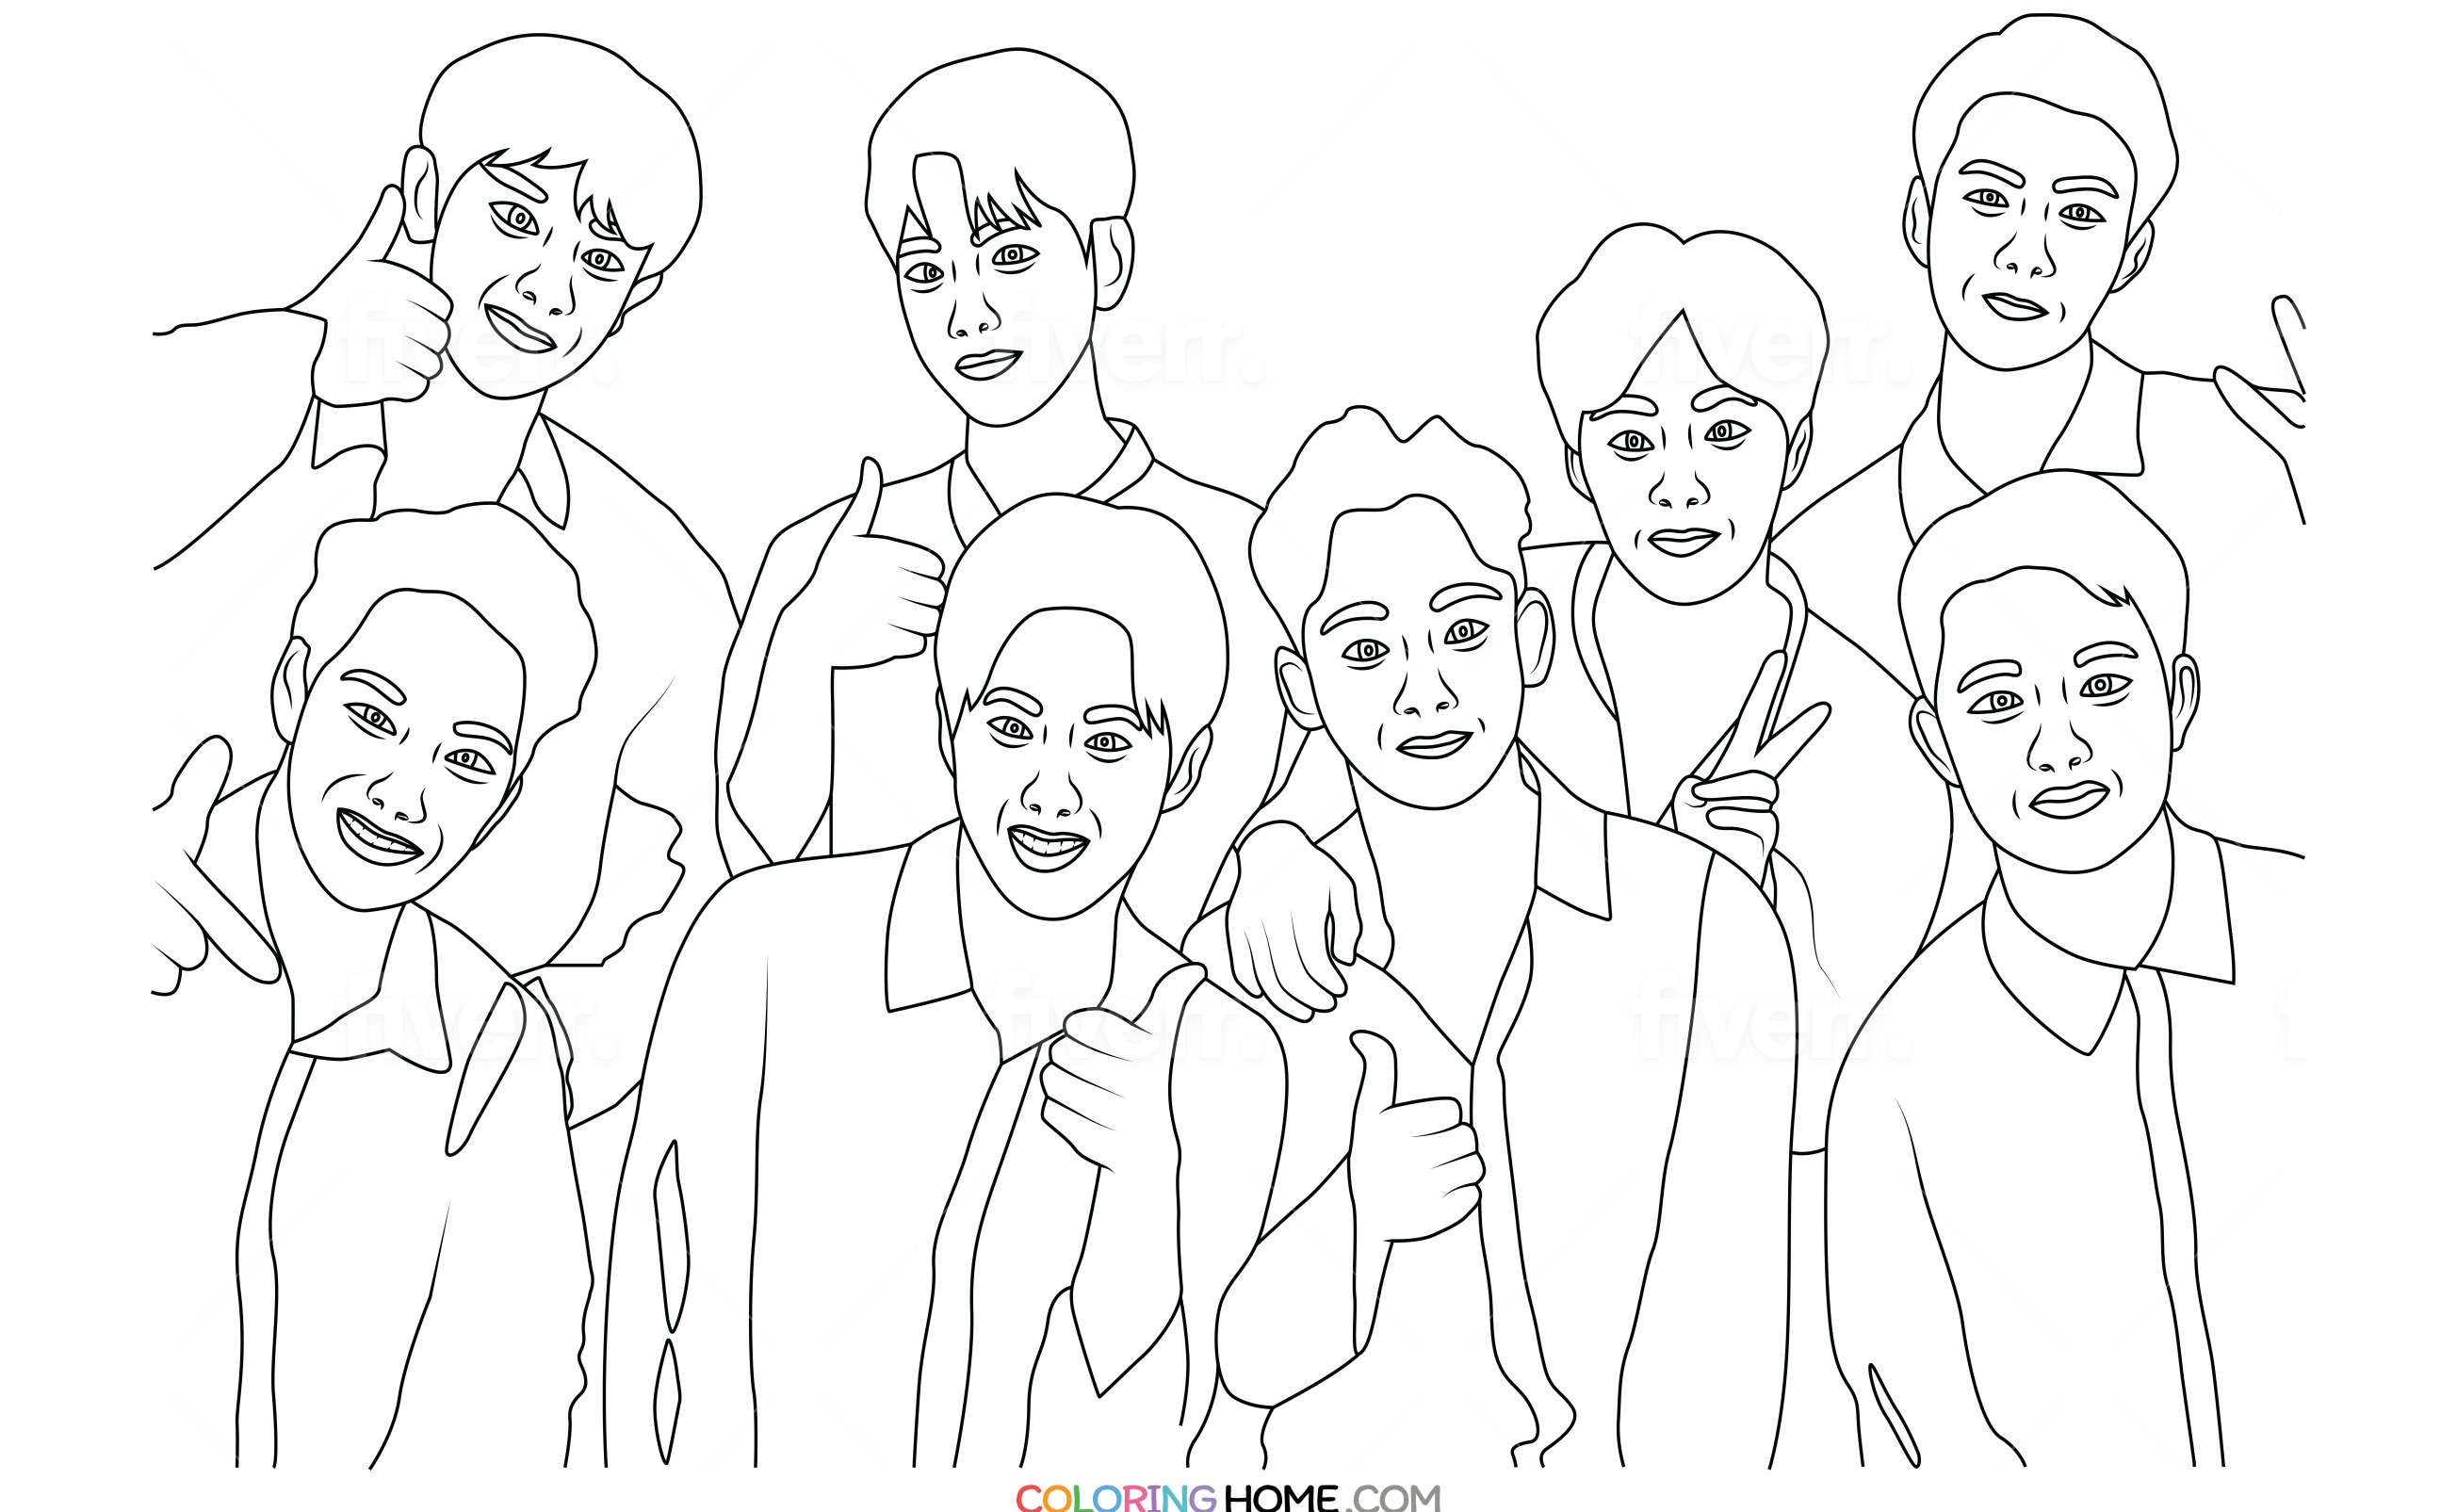 EXO coloring page